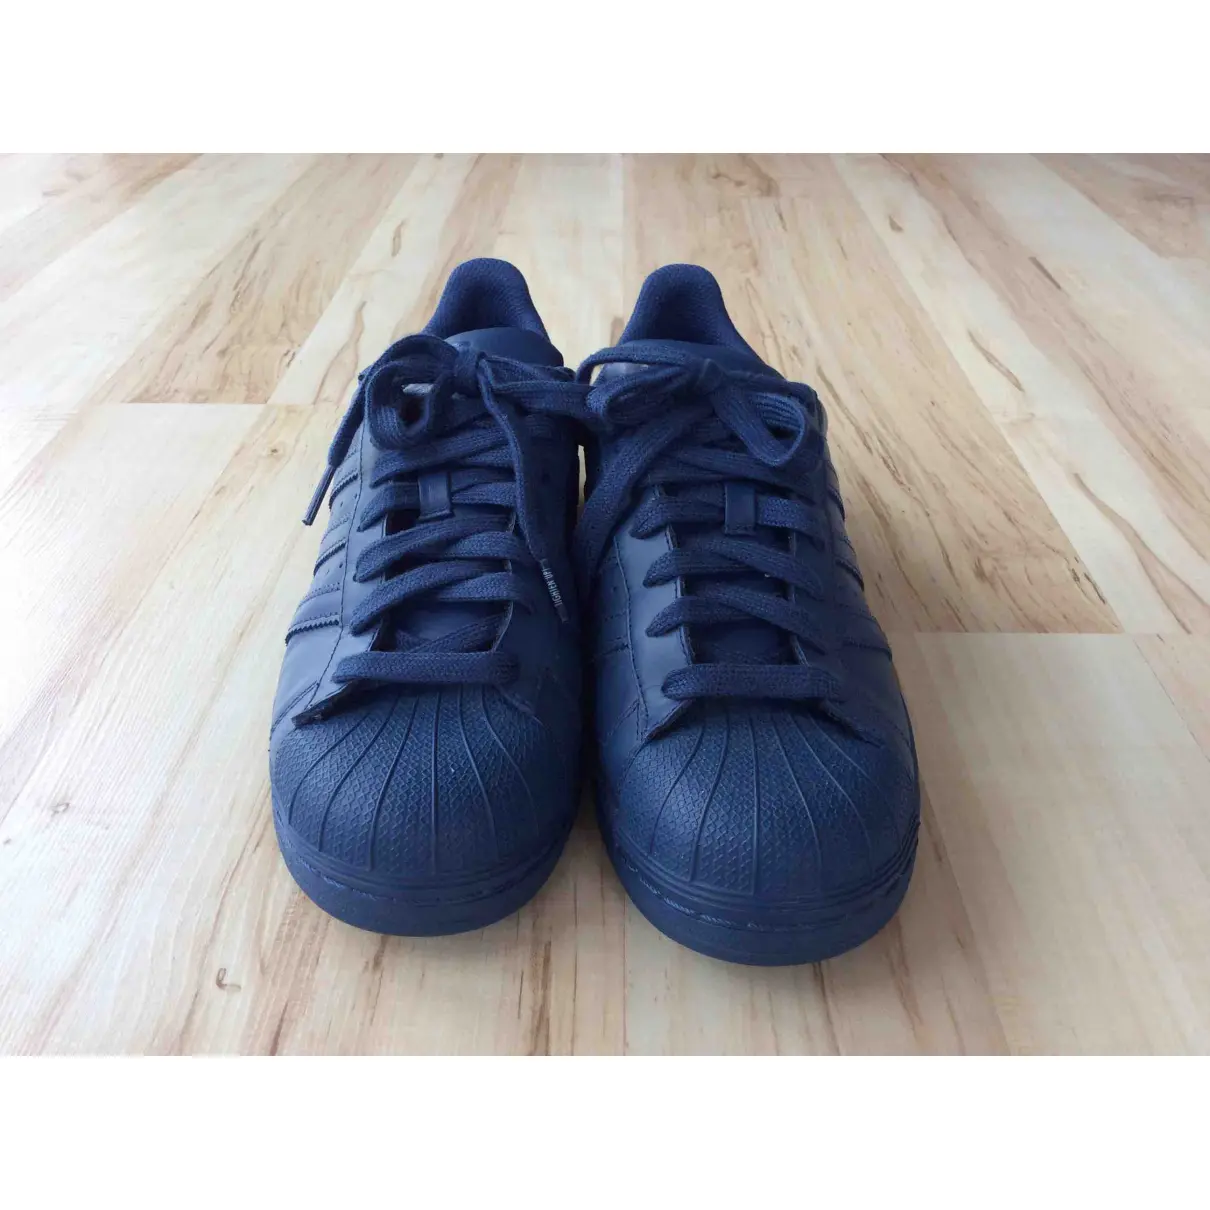 Buy Adidas x Pharrell Williams Leather low trainers online